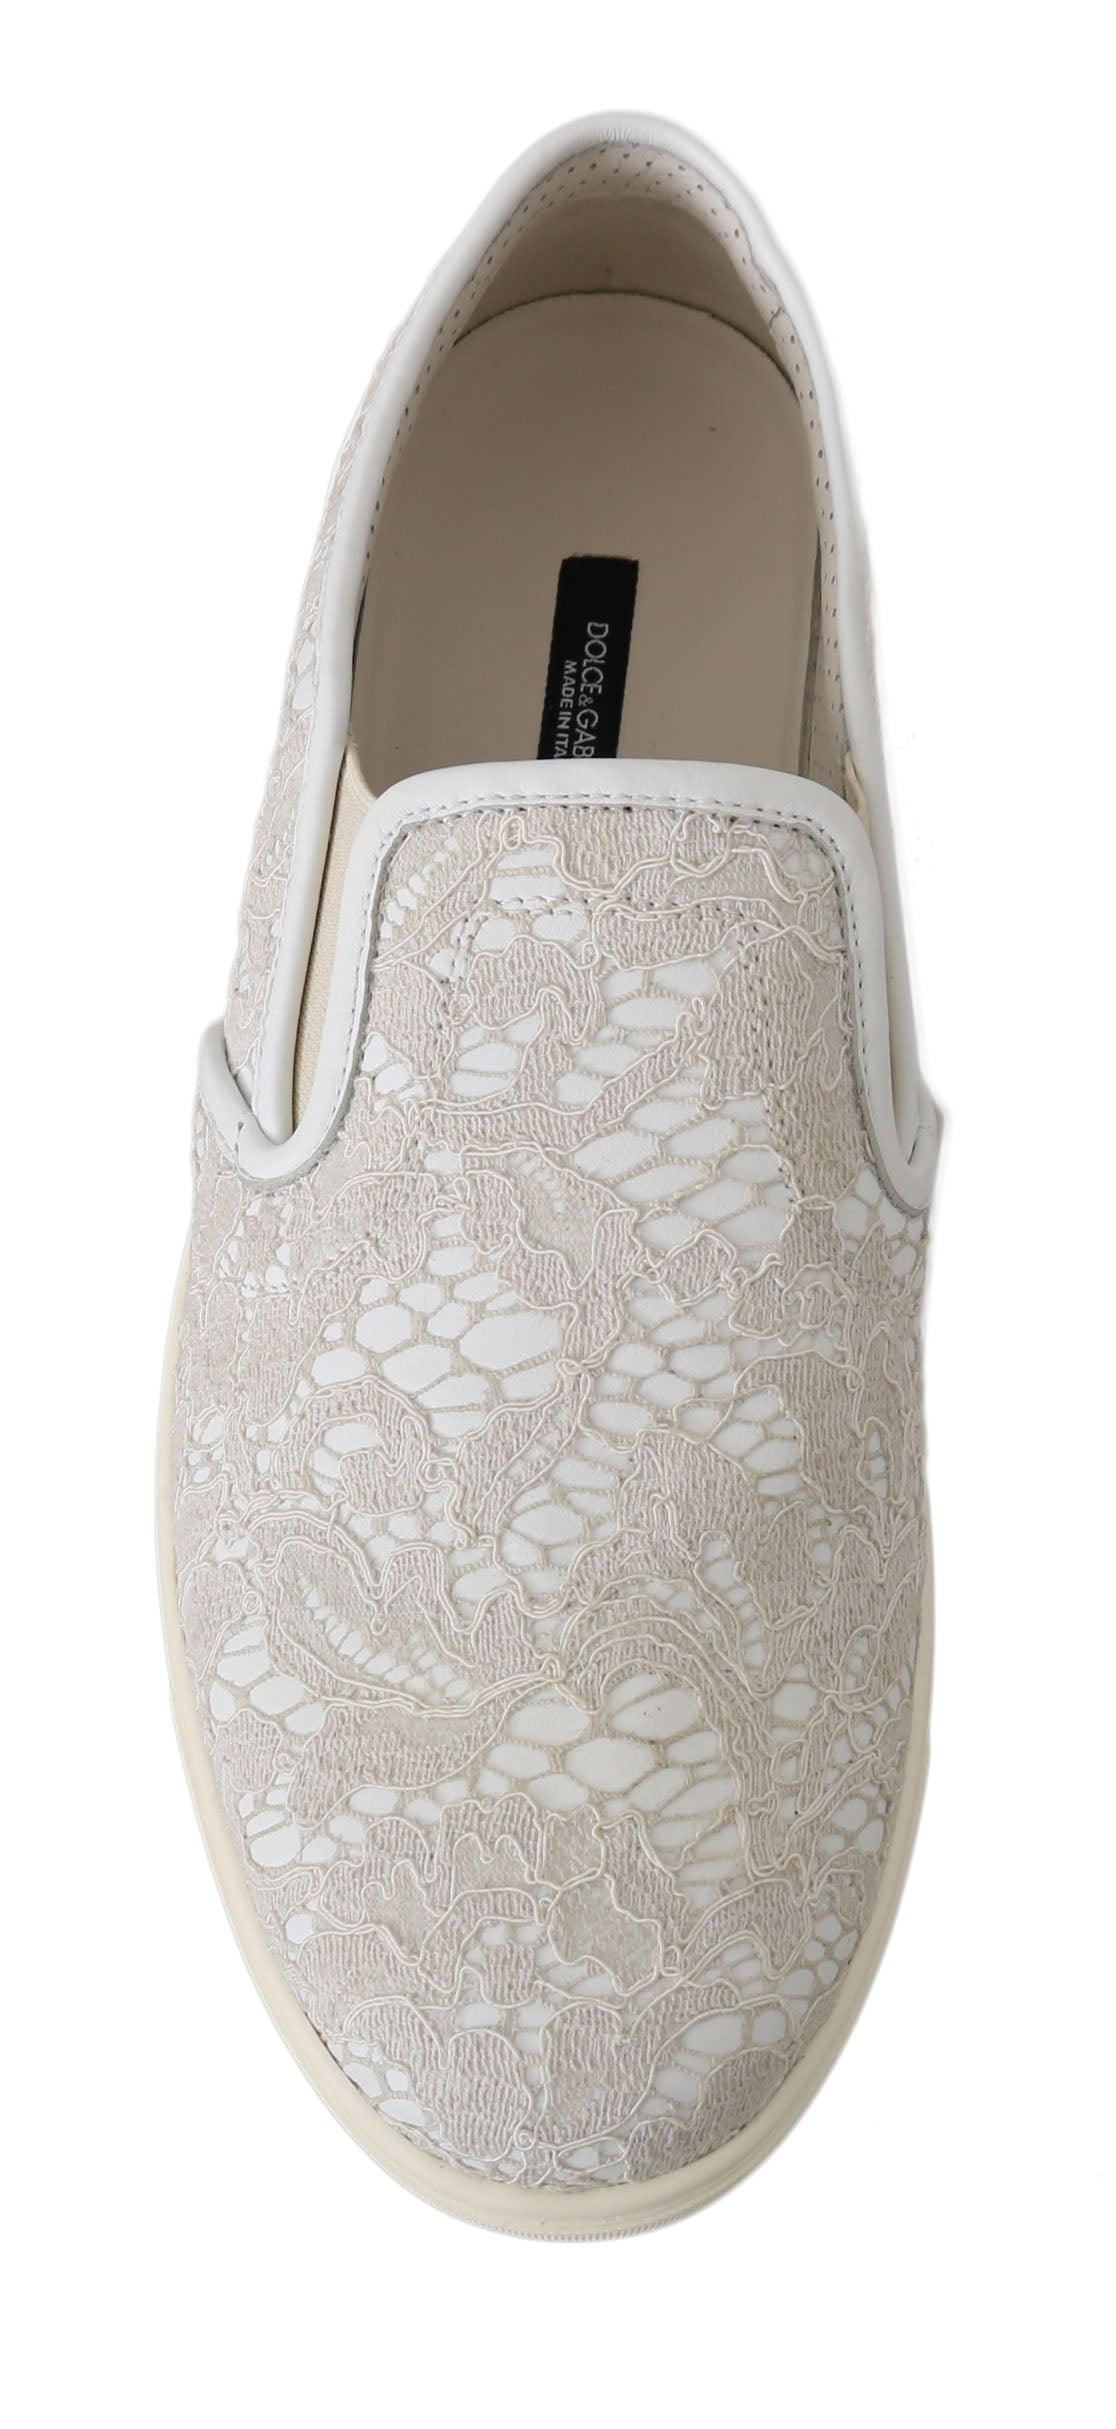 White Leather Lace Slip On Loafers Shoes designed by Dolce & Gabbana available from Moon Behind The Hill's Women's Footwear range